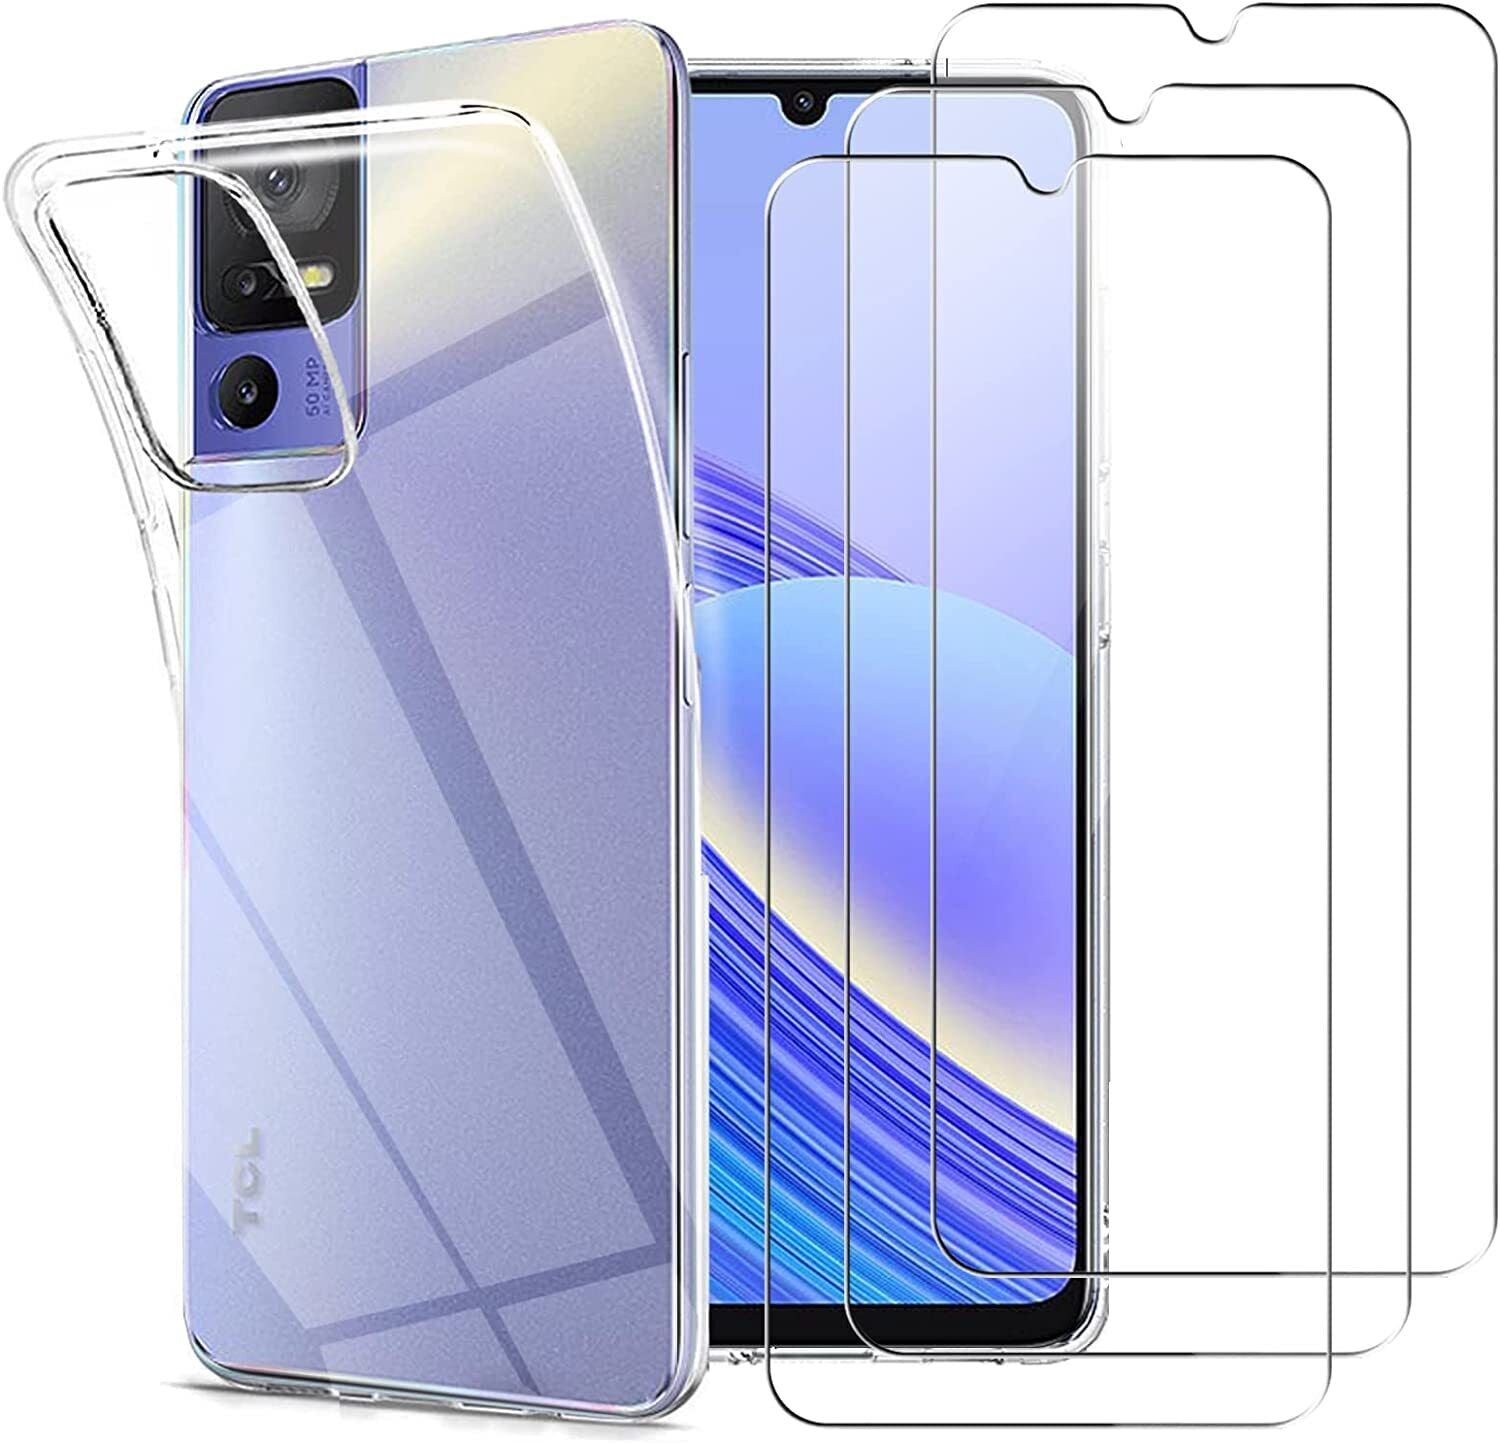 SDTEK Case for TCL 403 Gel Clear Cover + Glass Screen Protector